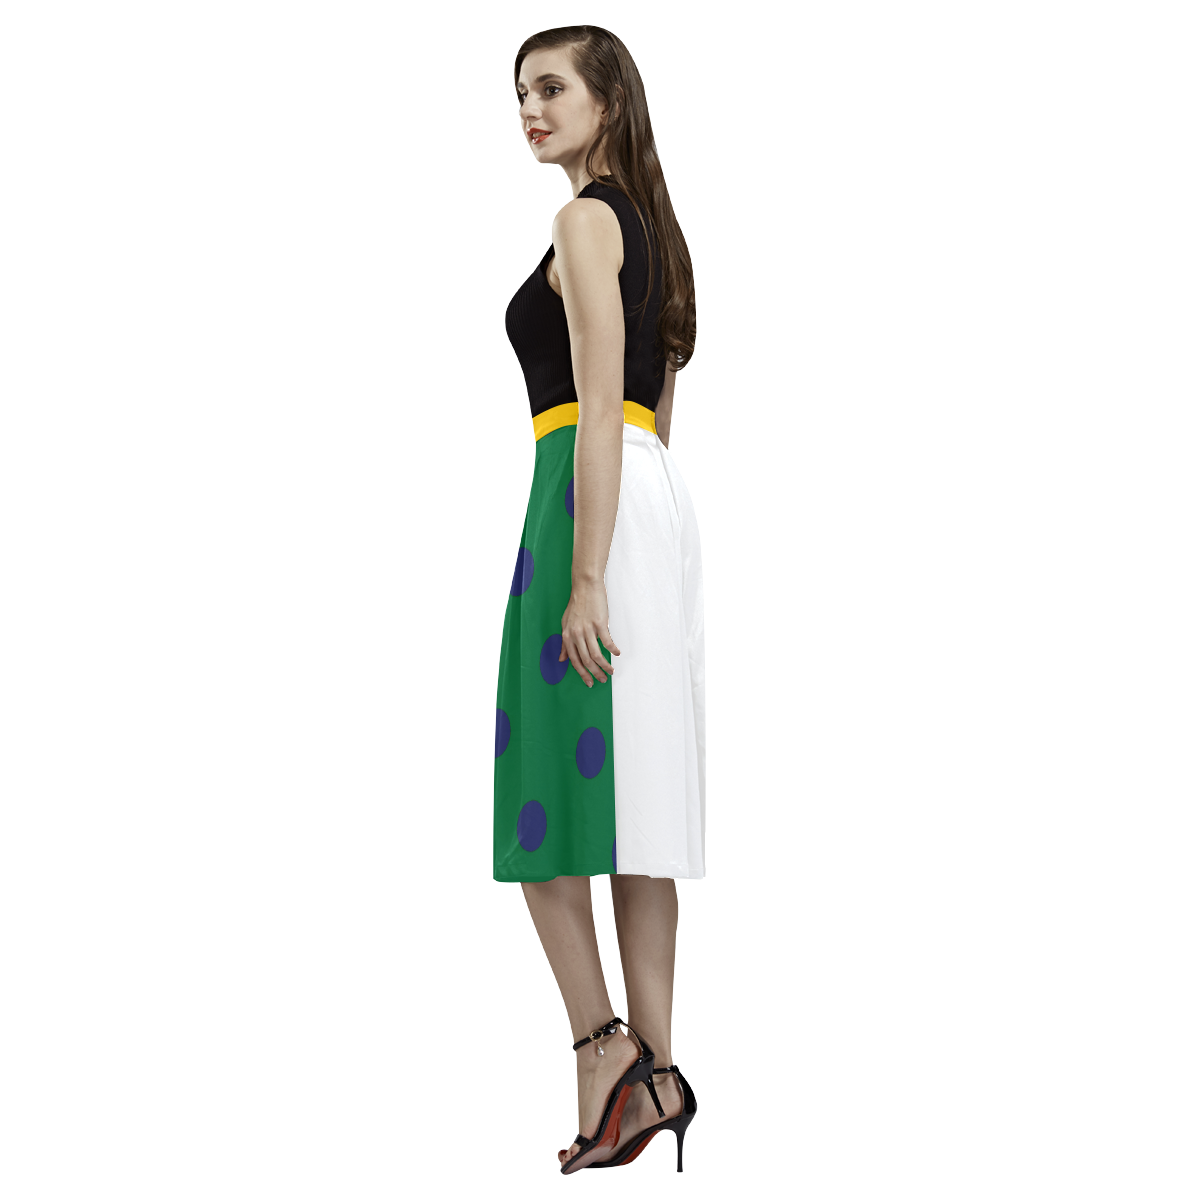 LUXURY LADY VINTAGE SKIRT WITH DOTS Aoede Crepe Skirt (Model D16)